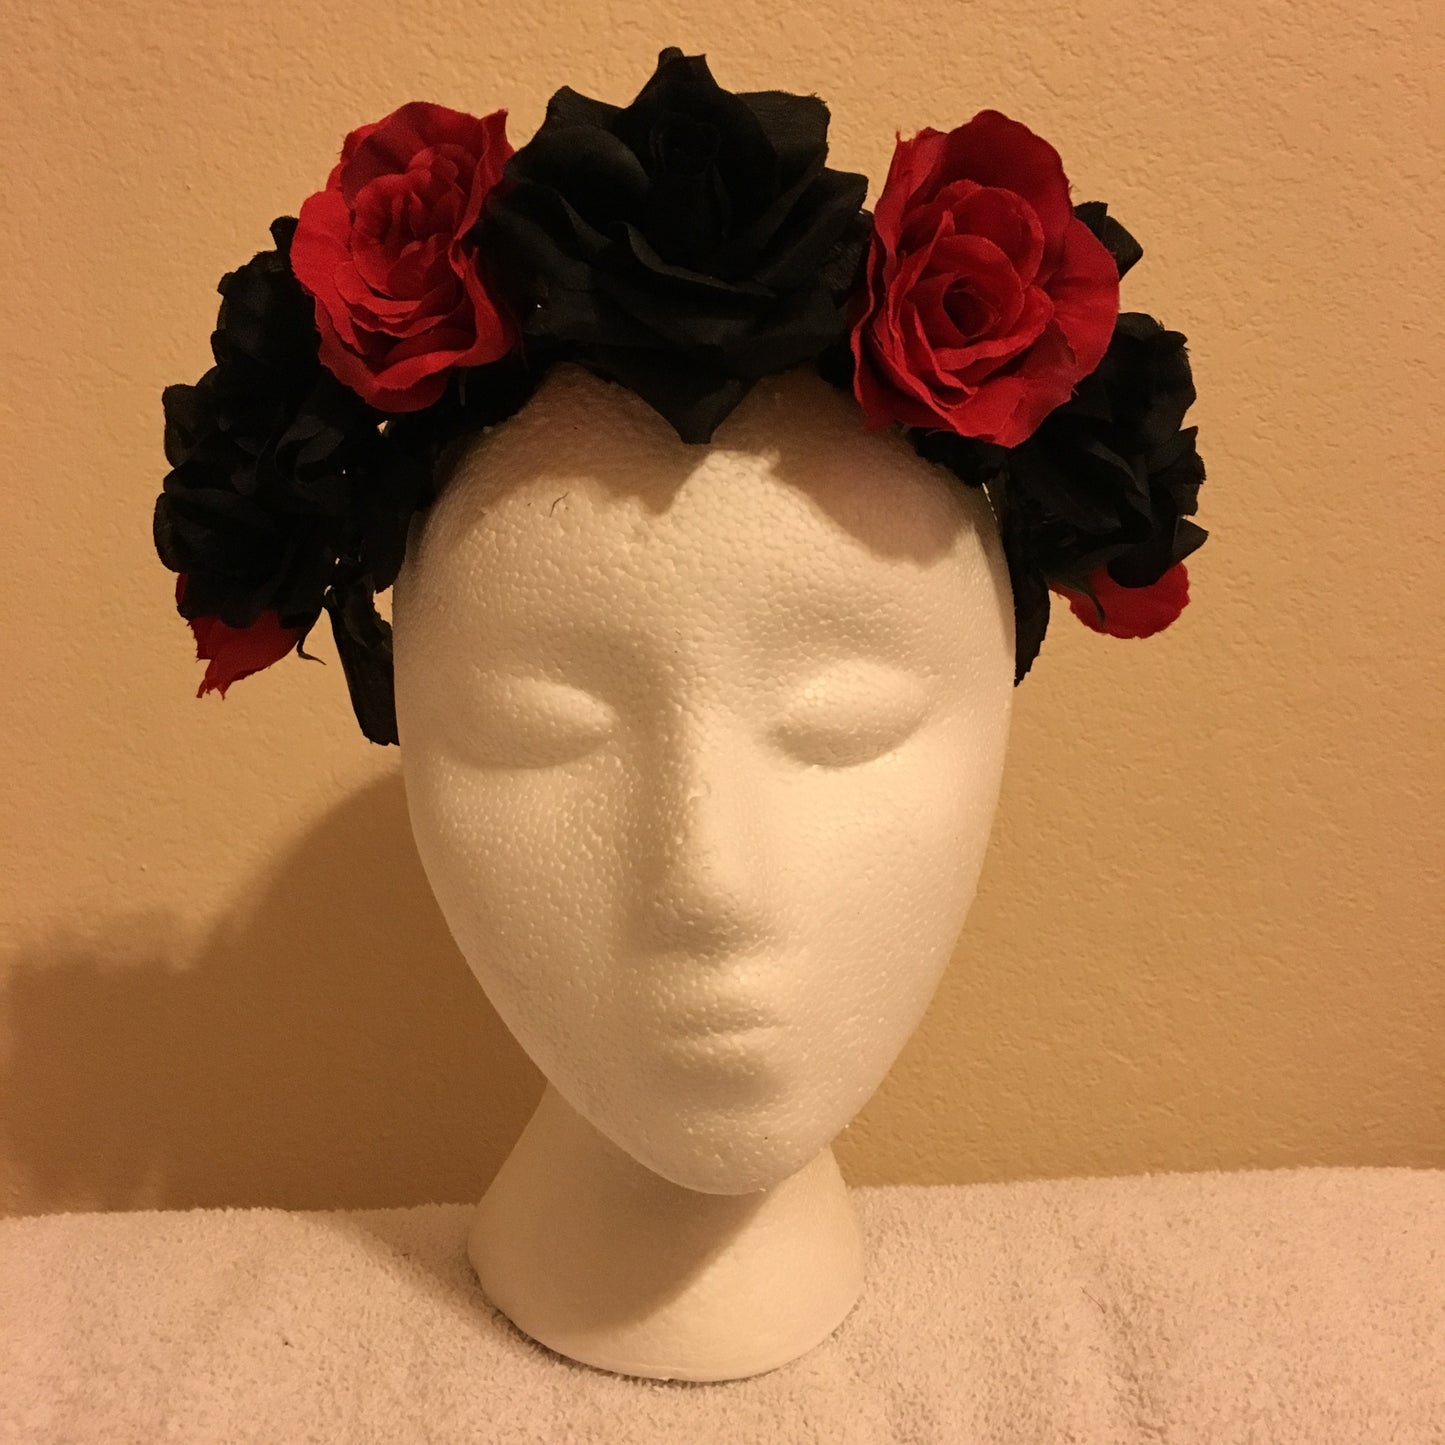 Small Wreath - Black & red roses